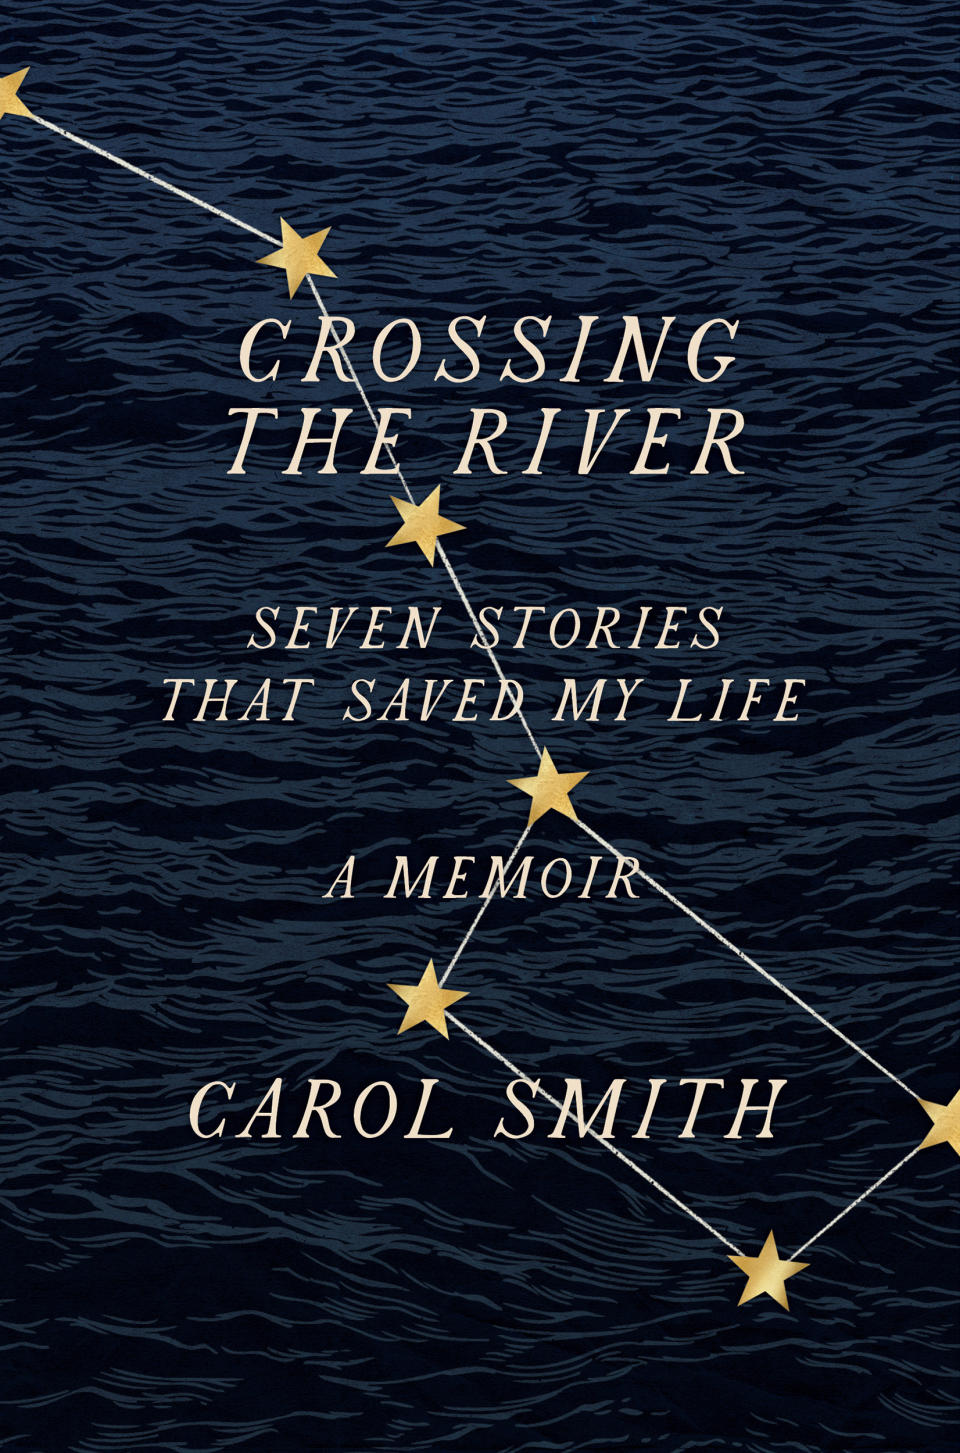 Carol Smith is the author of 